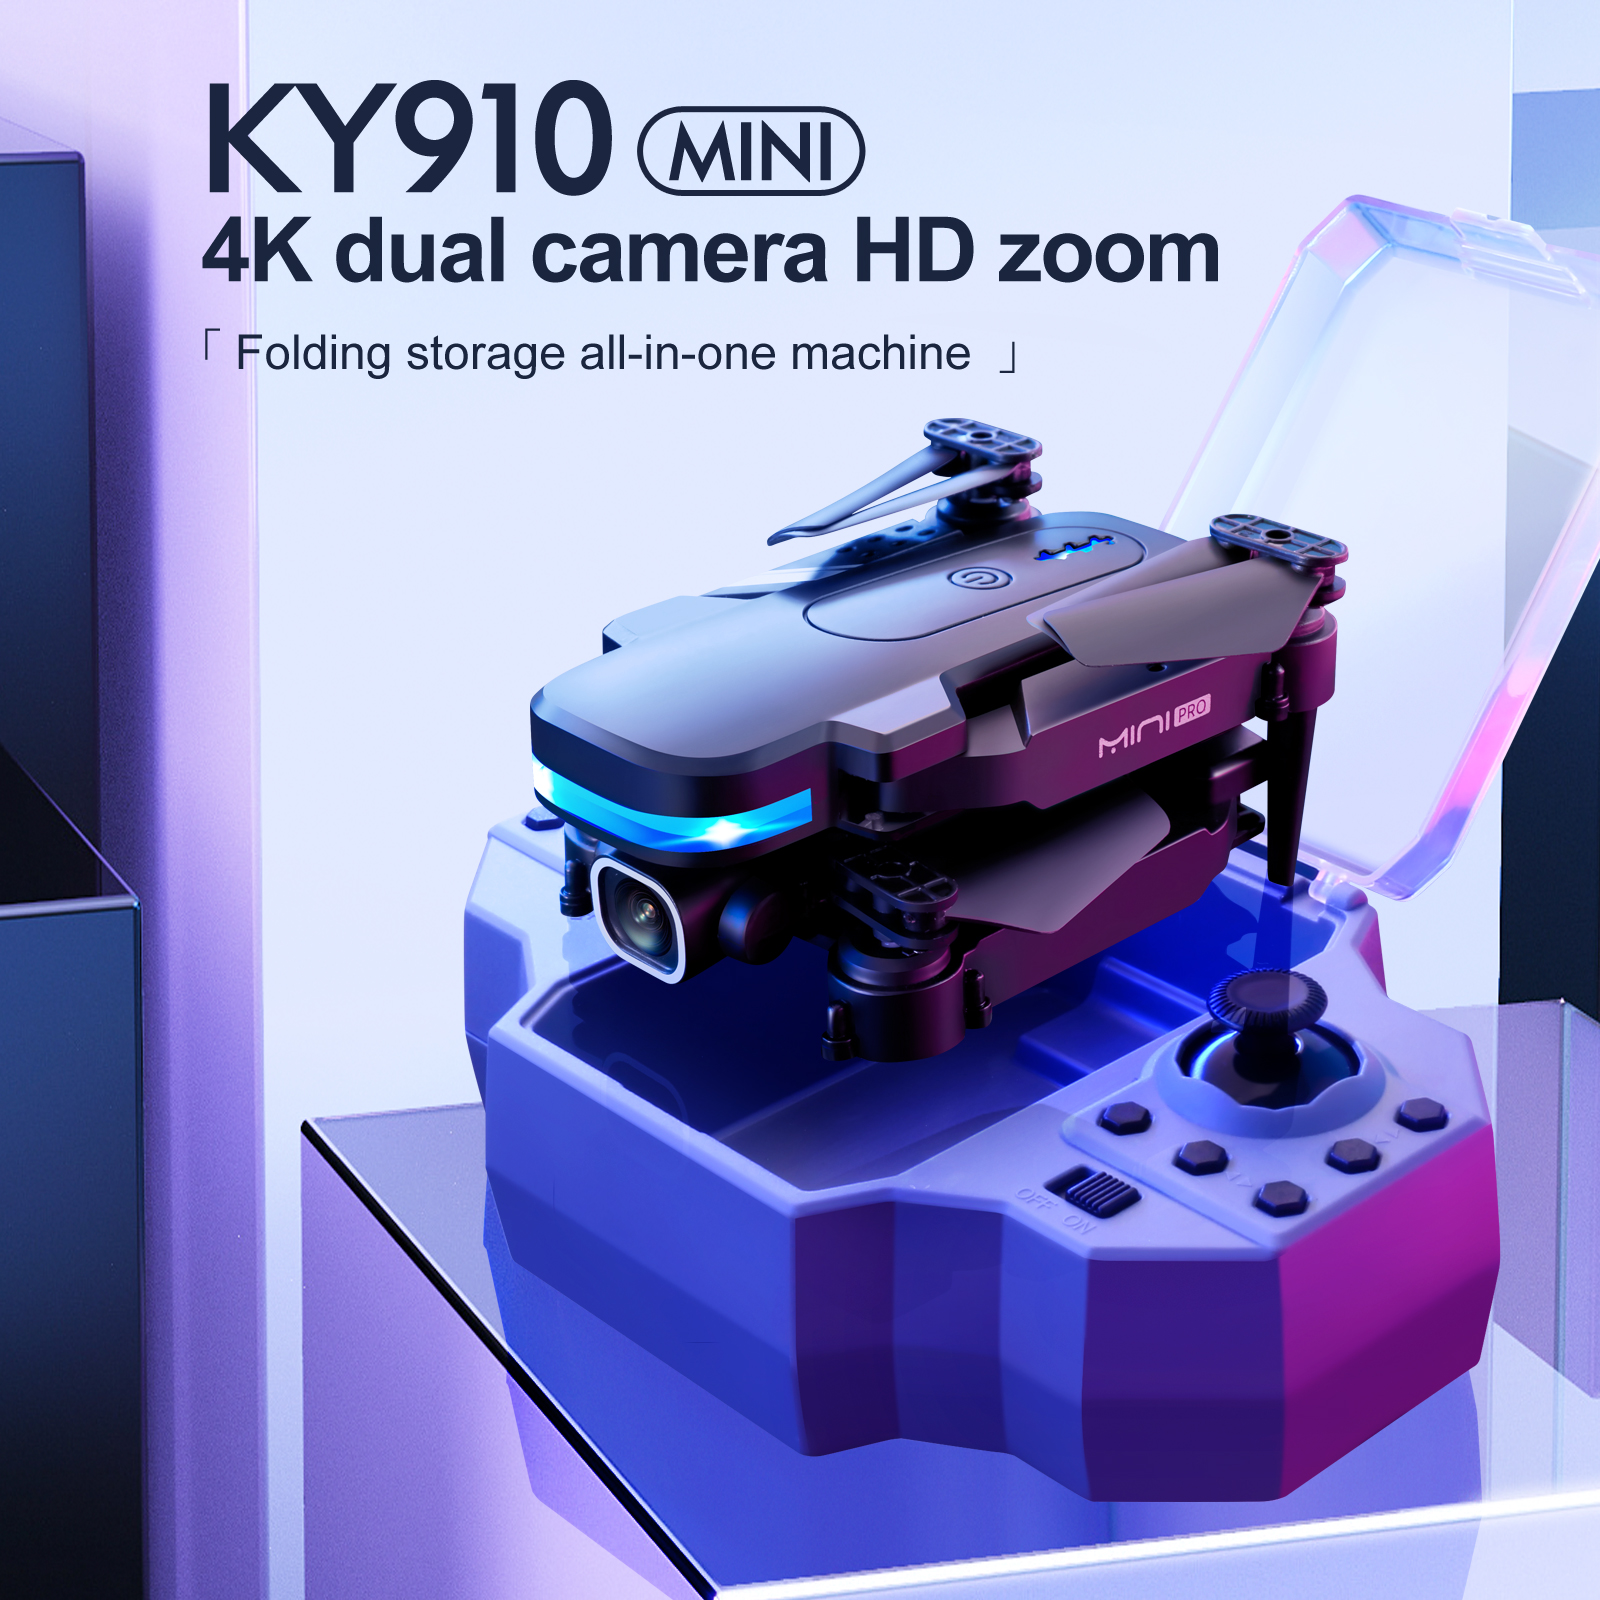 KY910-Mini-WiFi-FPV-with-4K-HD-Dual-50x-ZOOM-Camera-Altitude-Hold-Mode-Gravity-Control-Foldable-RC-D-1902386-1